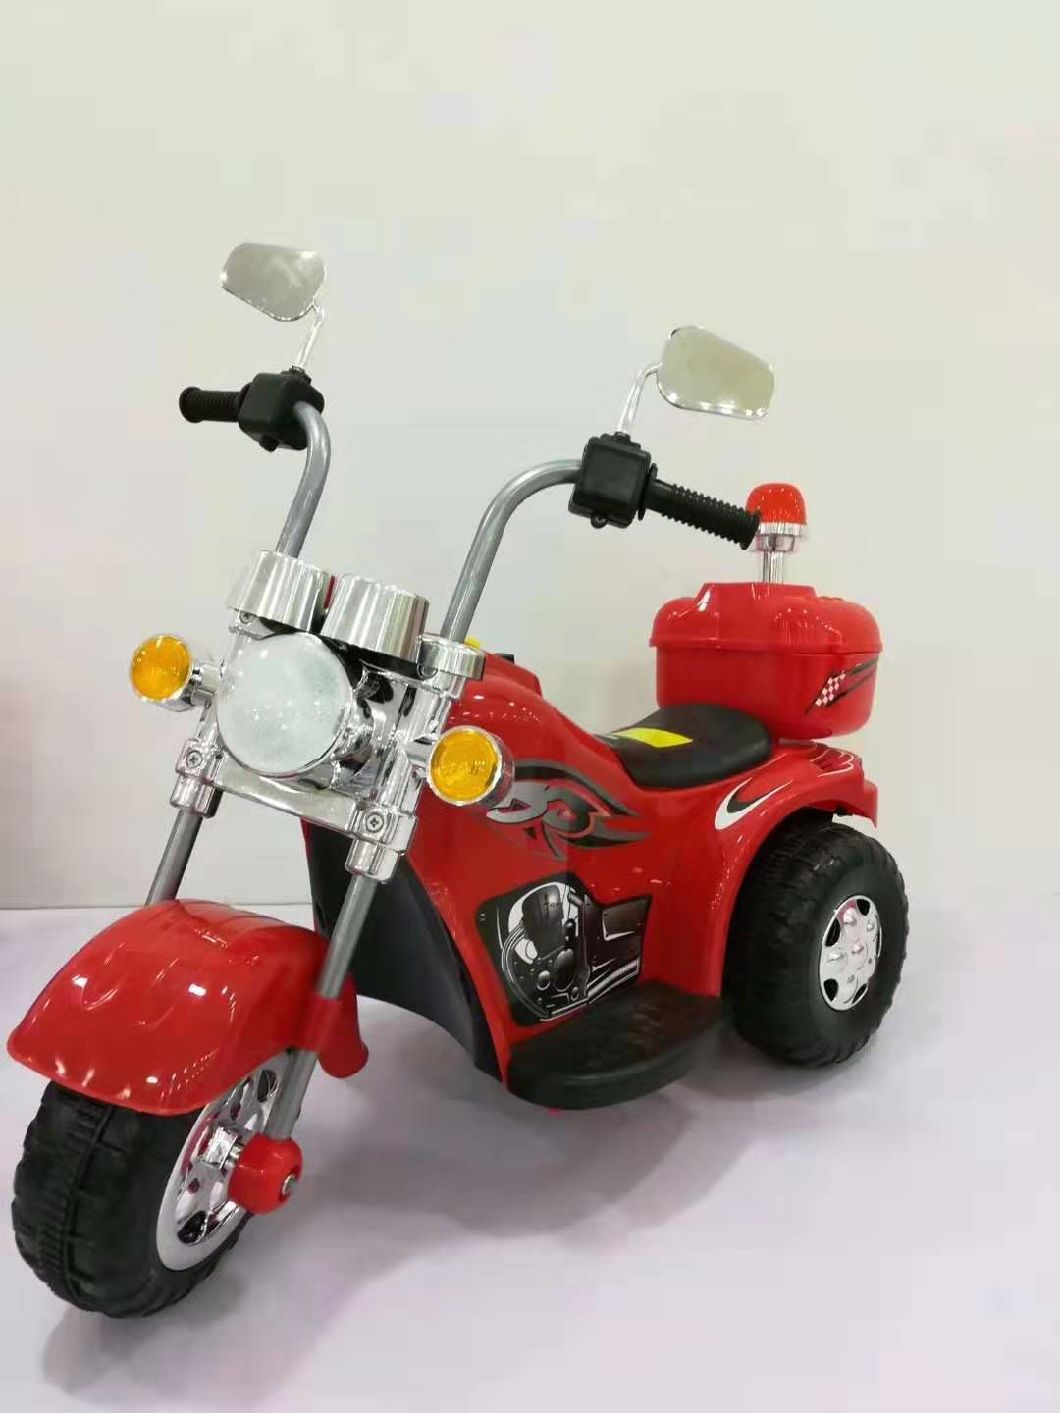 2019 New Product Baby Ride on Motorcycle for Kids Electric Motorcycle